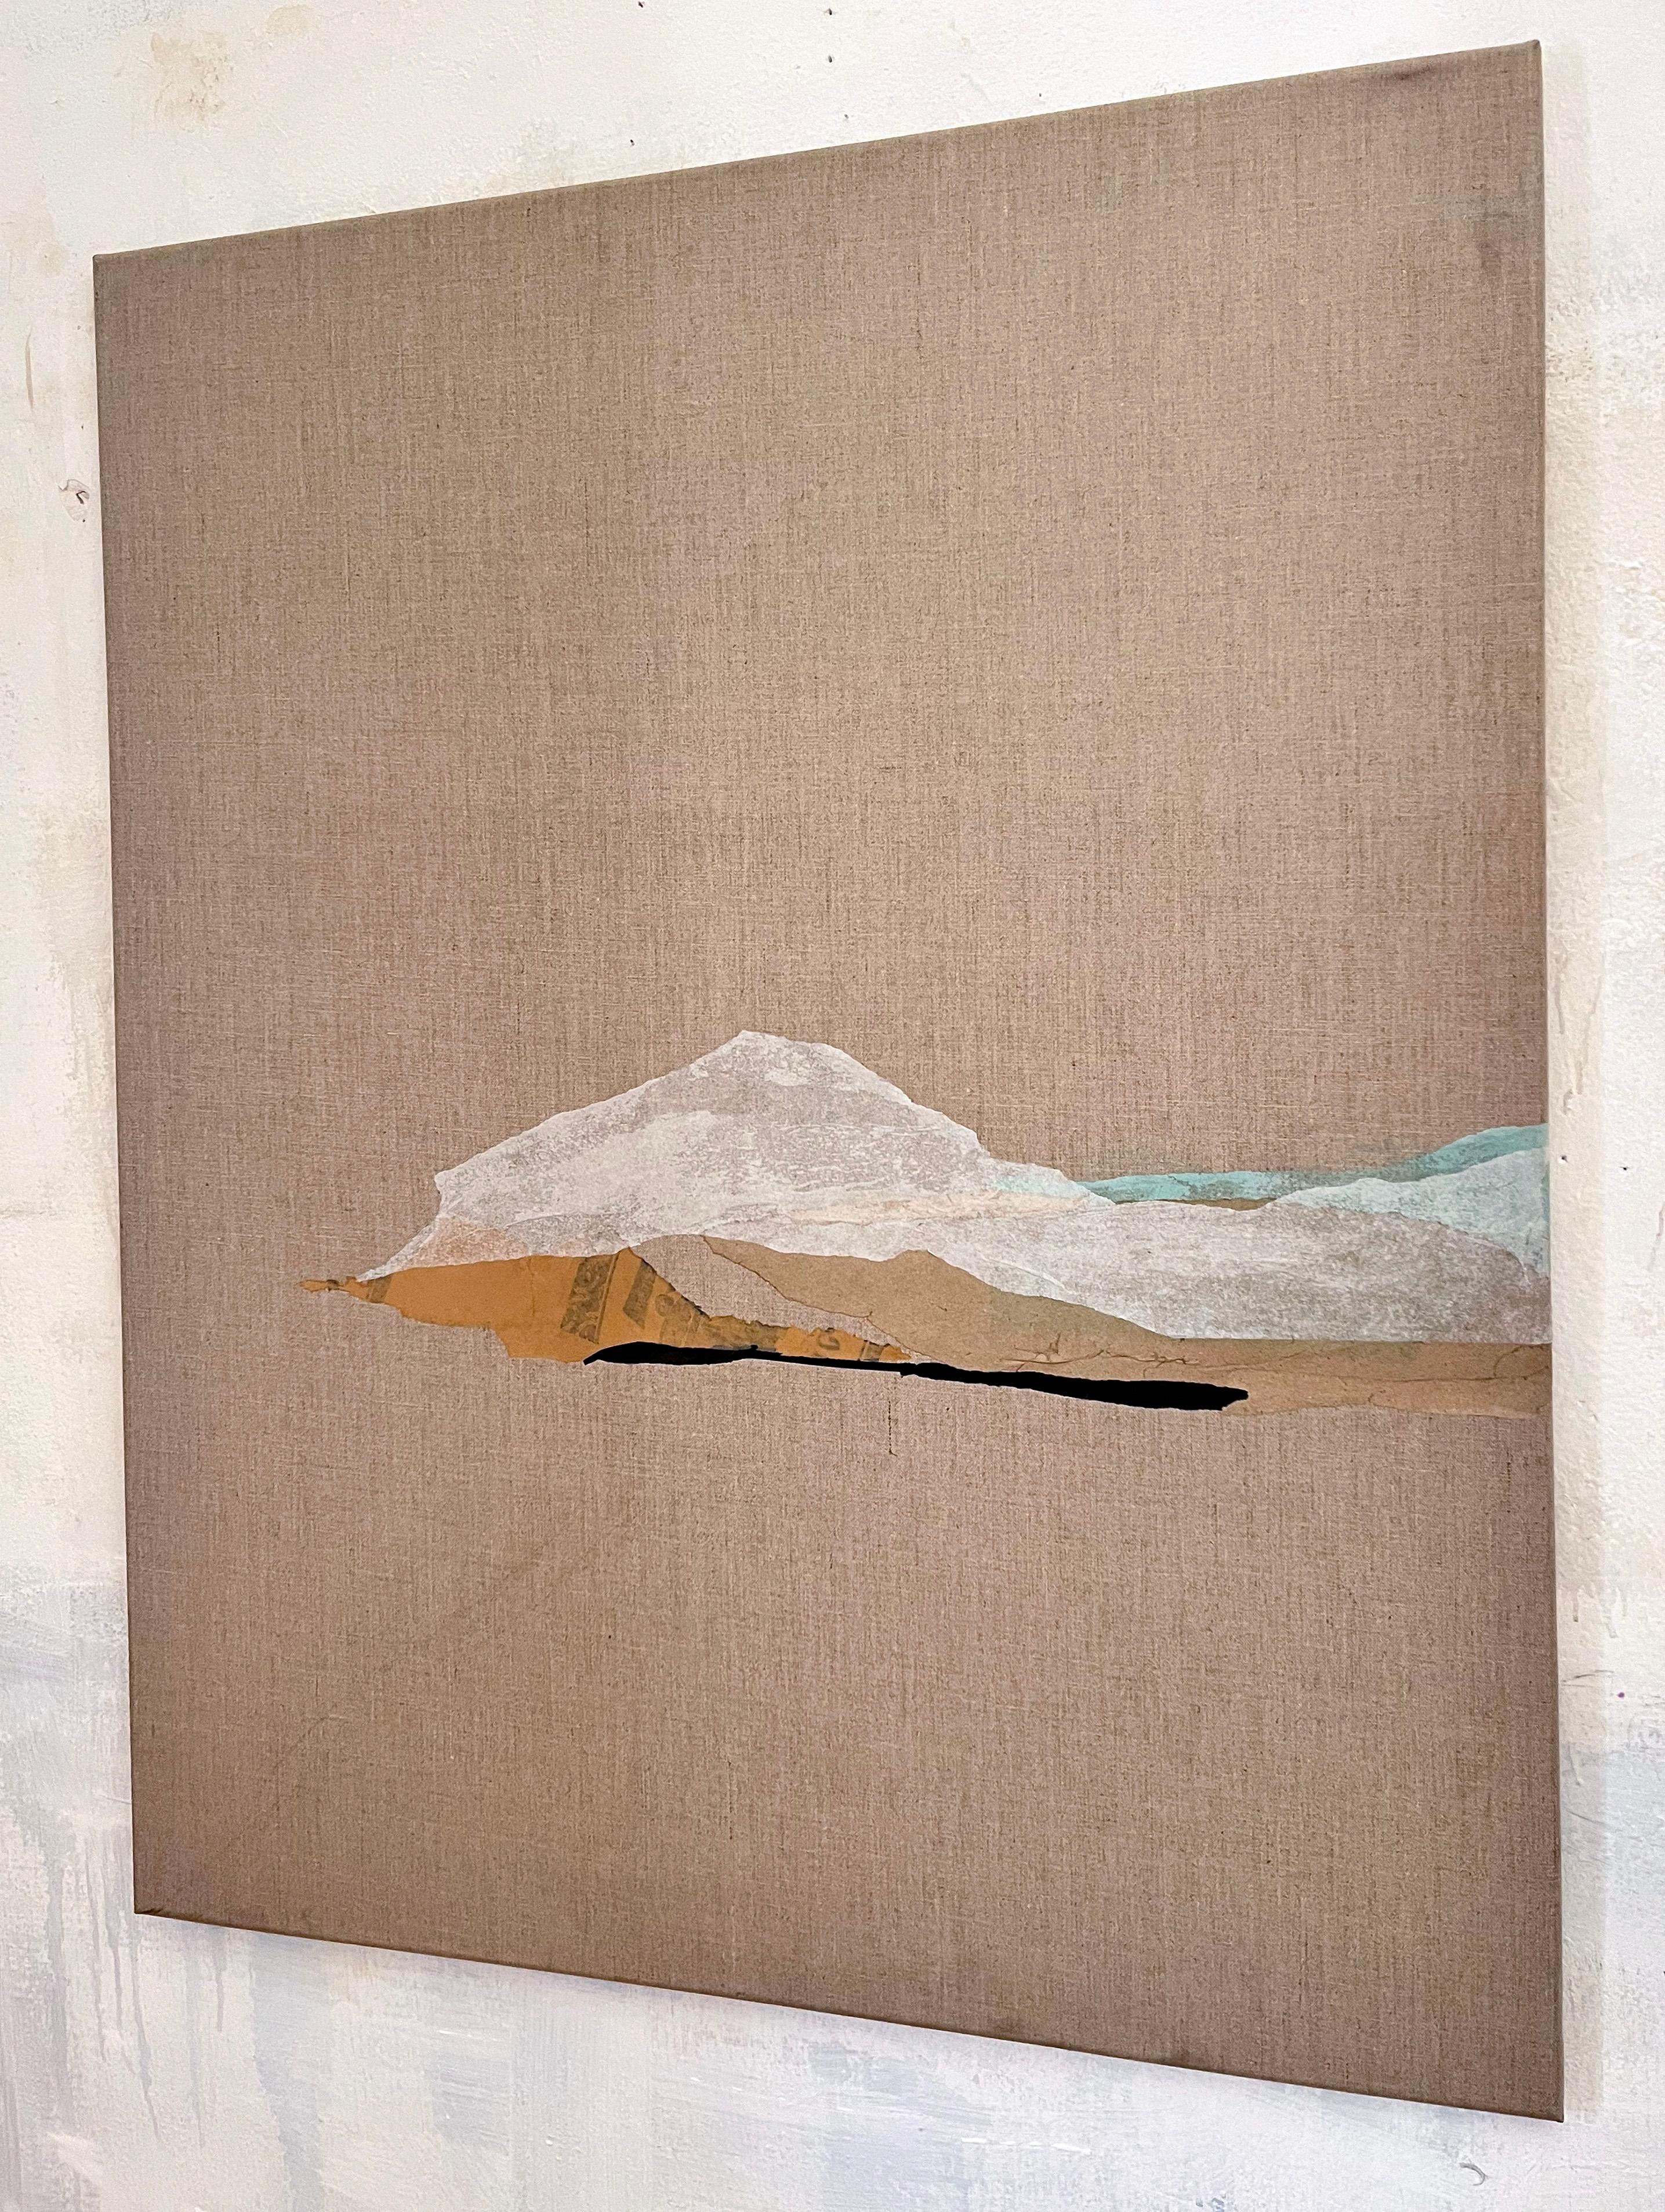 PaperLandscape
collage on linen canvas
100x80 cm
2020

PaperLandscape is a series of artworks inspired by landscape and nature,
nature and the passage change over time, we change nature and nature changes man
the connection between man and nature is